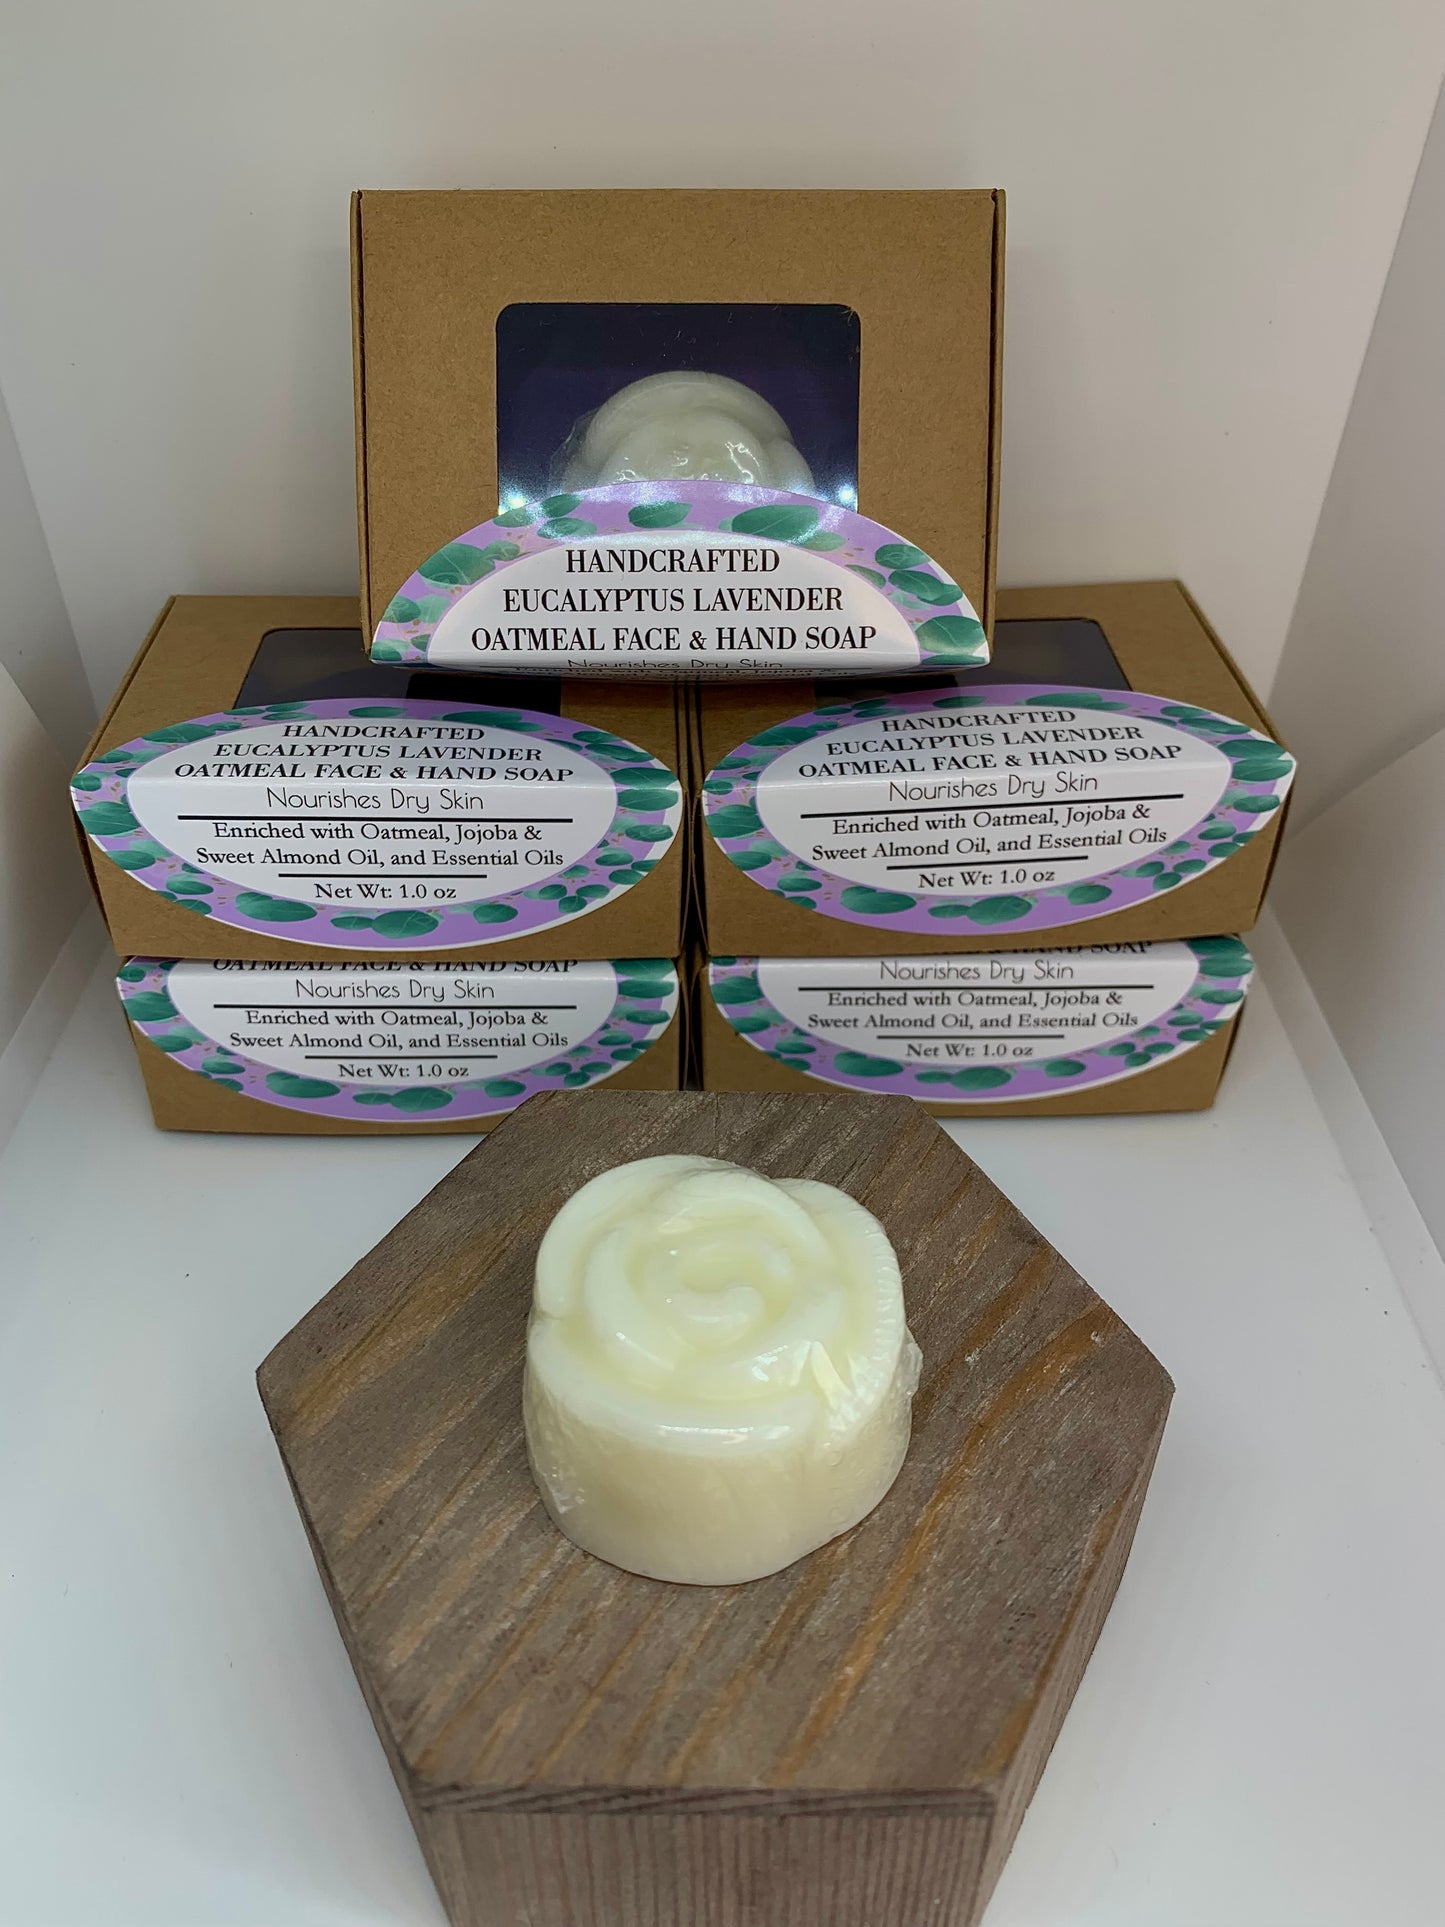 1 oz Handcrafted Eucalyptus Lavender EO Oatmeal Natural Face & Hand Soap Bar Enriched with Jojoba and Sweet Almond Oils in Floral Rose Shape